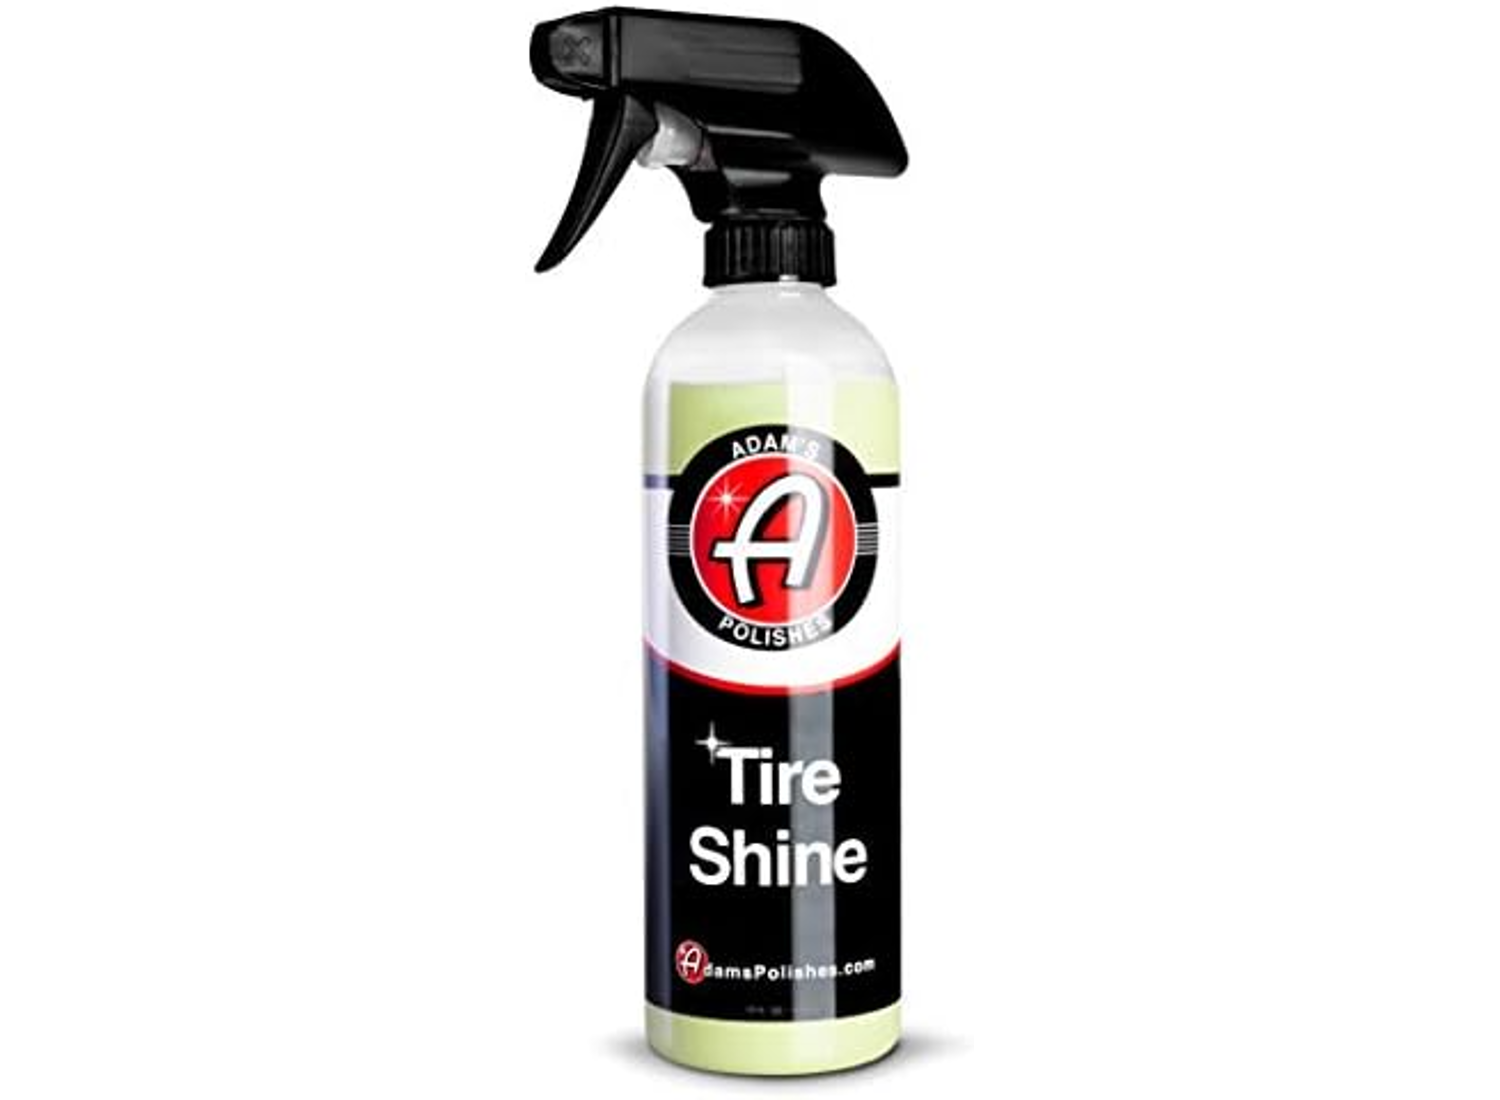 Black, red, and white bottle of spray tire shine on a white background.